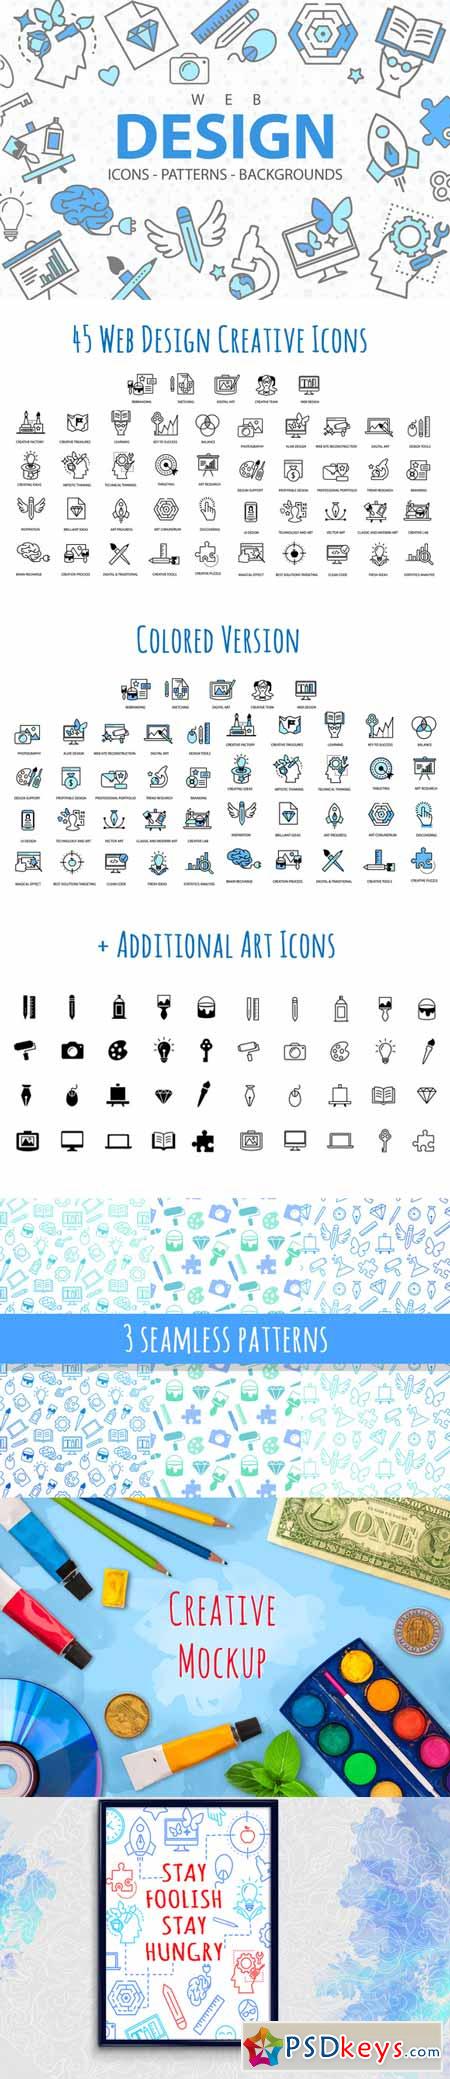 Web Design Icons, Patterns and More 587712